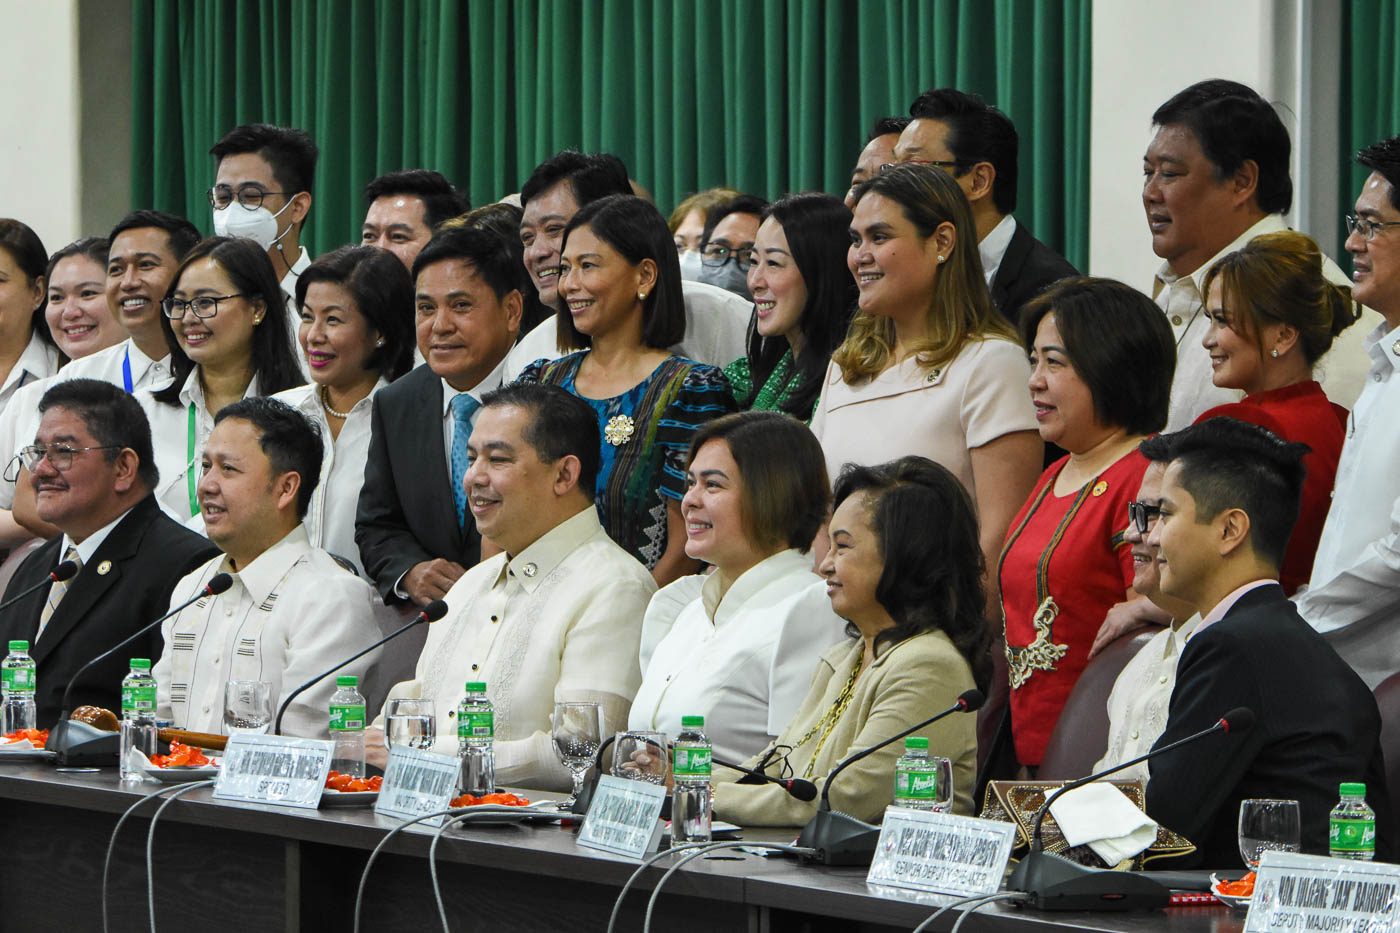 Makabayan lawmaker: End parliamentary courtesy tradition in budget hearings